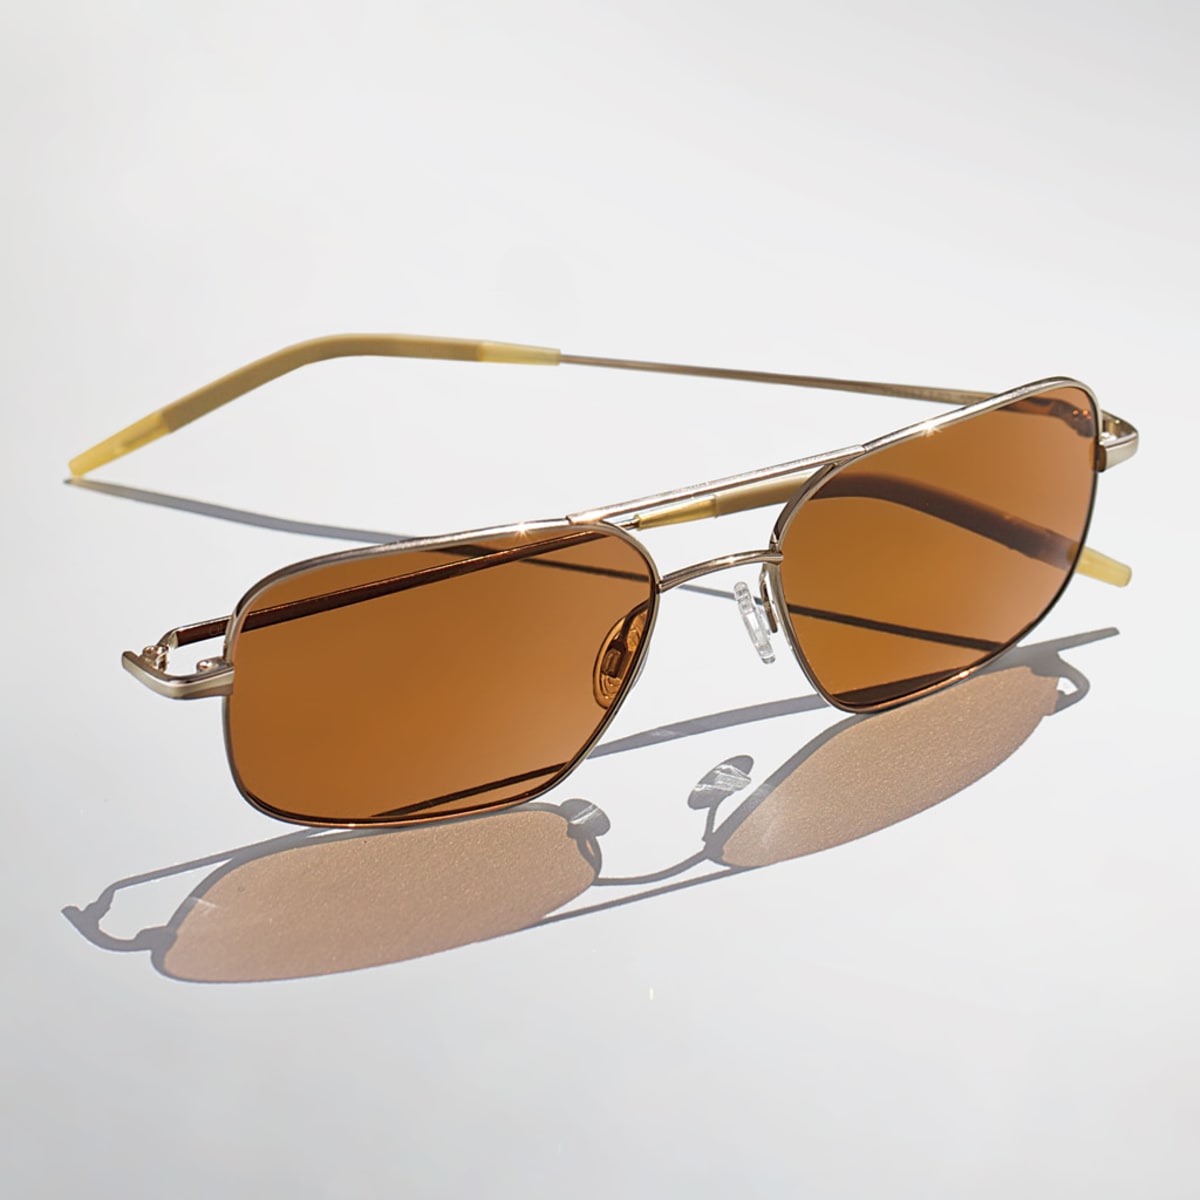 Back by Popular Demand: The Oliver Peoples Victory - Acquire